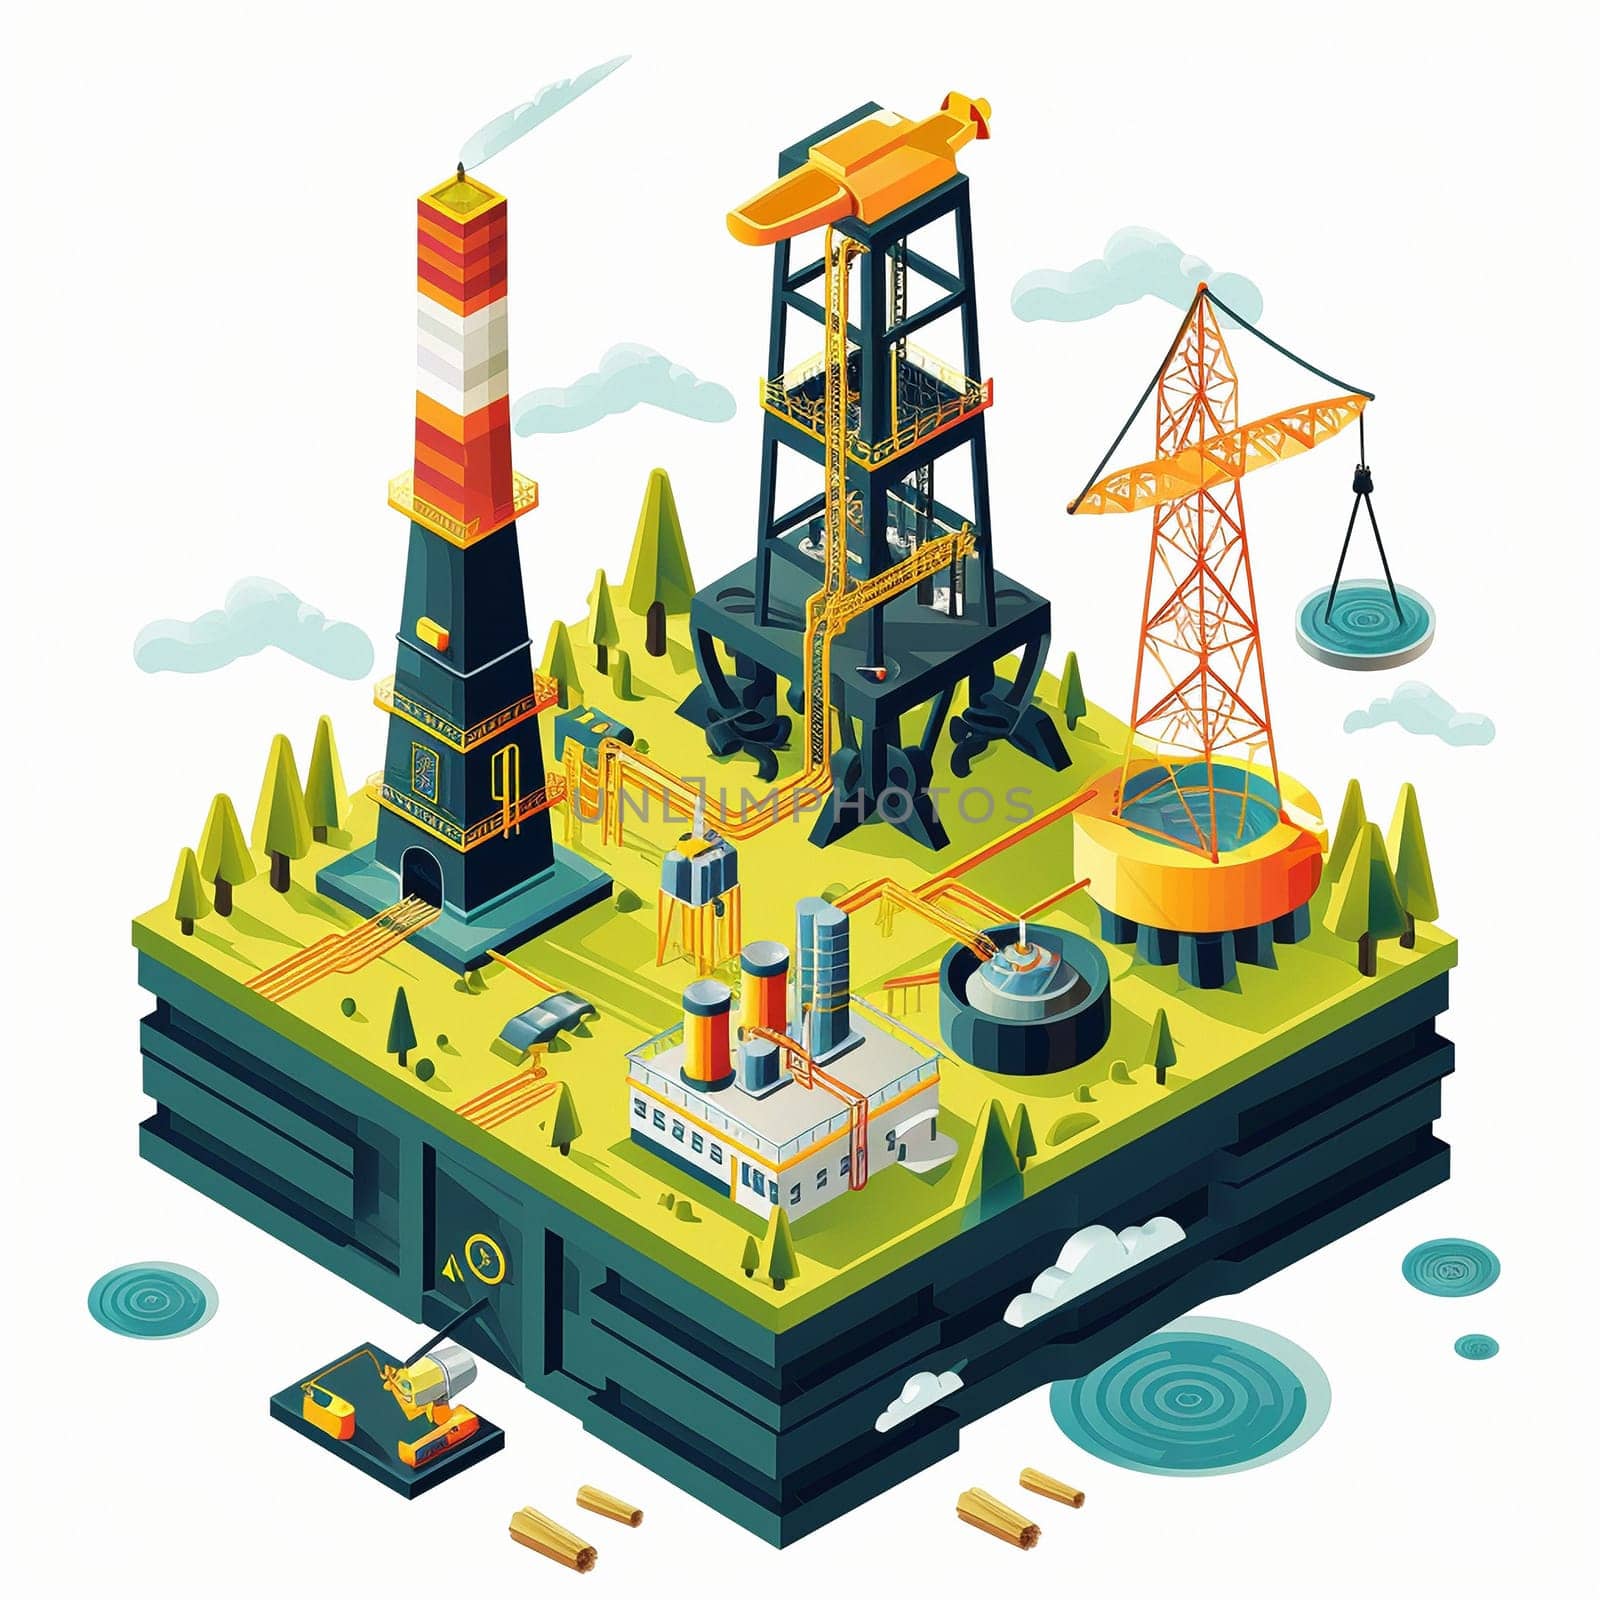 project teamwork in the field of oil production. isometric illustration. High quality illustration